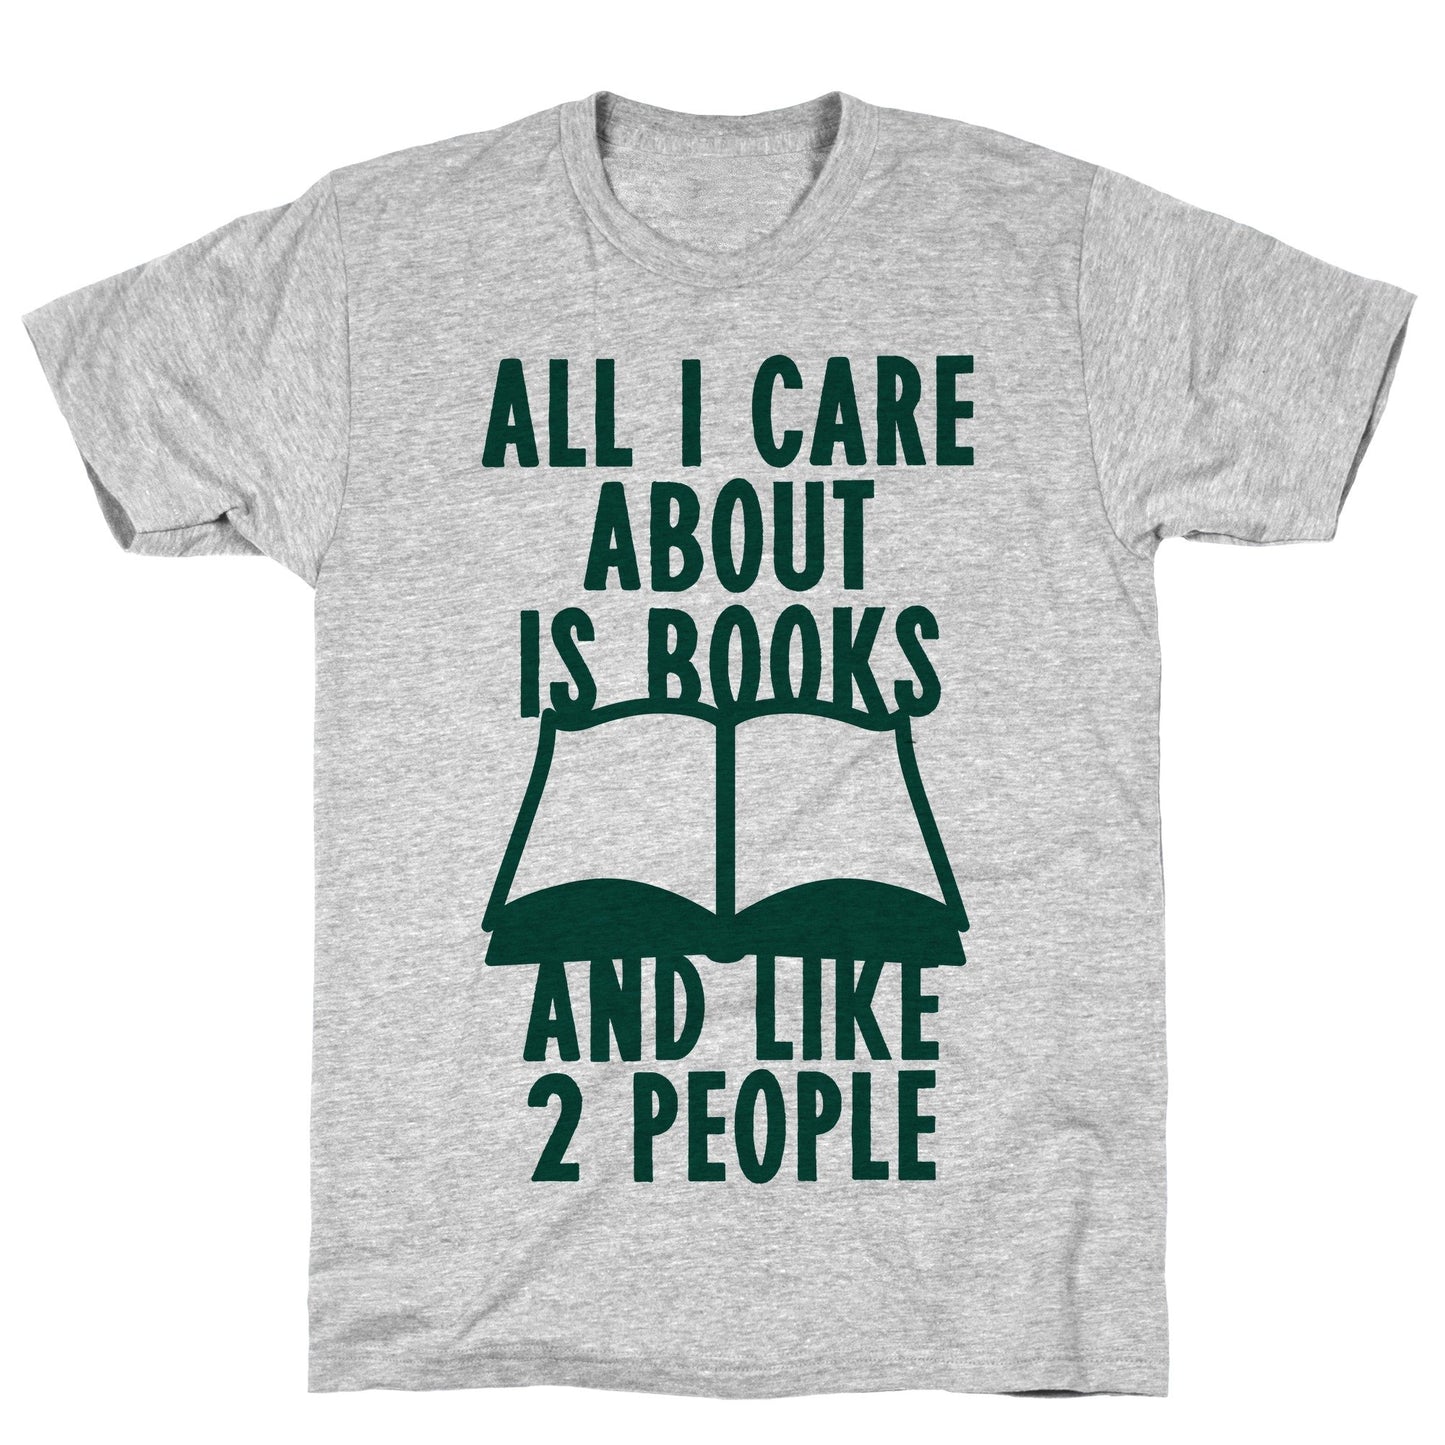 All I Care About Is Books (And Like 2 People Athletic Gray Unisex Cotton Tee